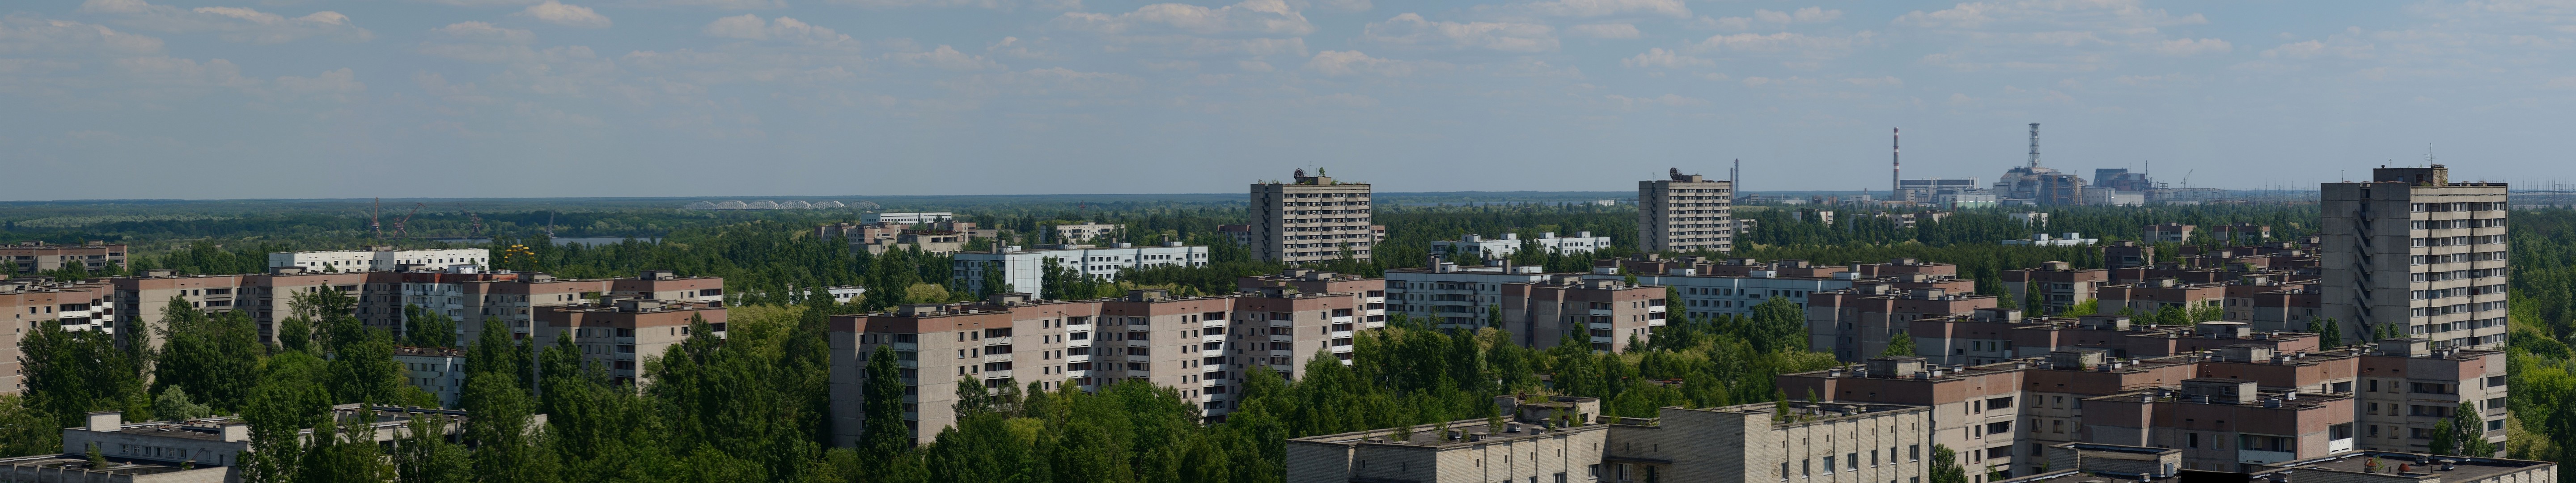 Pripyat, Panorama, City, Town, Ukraine, Nuclear, Chernobyl, Disaster, Building, Nature, Power plant, Sky, Ghost town, Accidents, Dangerous, Abandoned, Triple screen, Multiple display Wallpaper